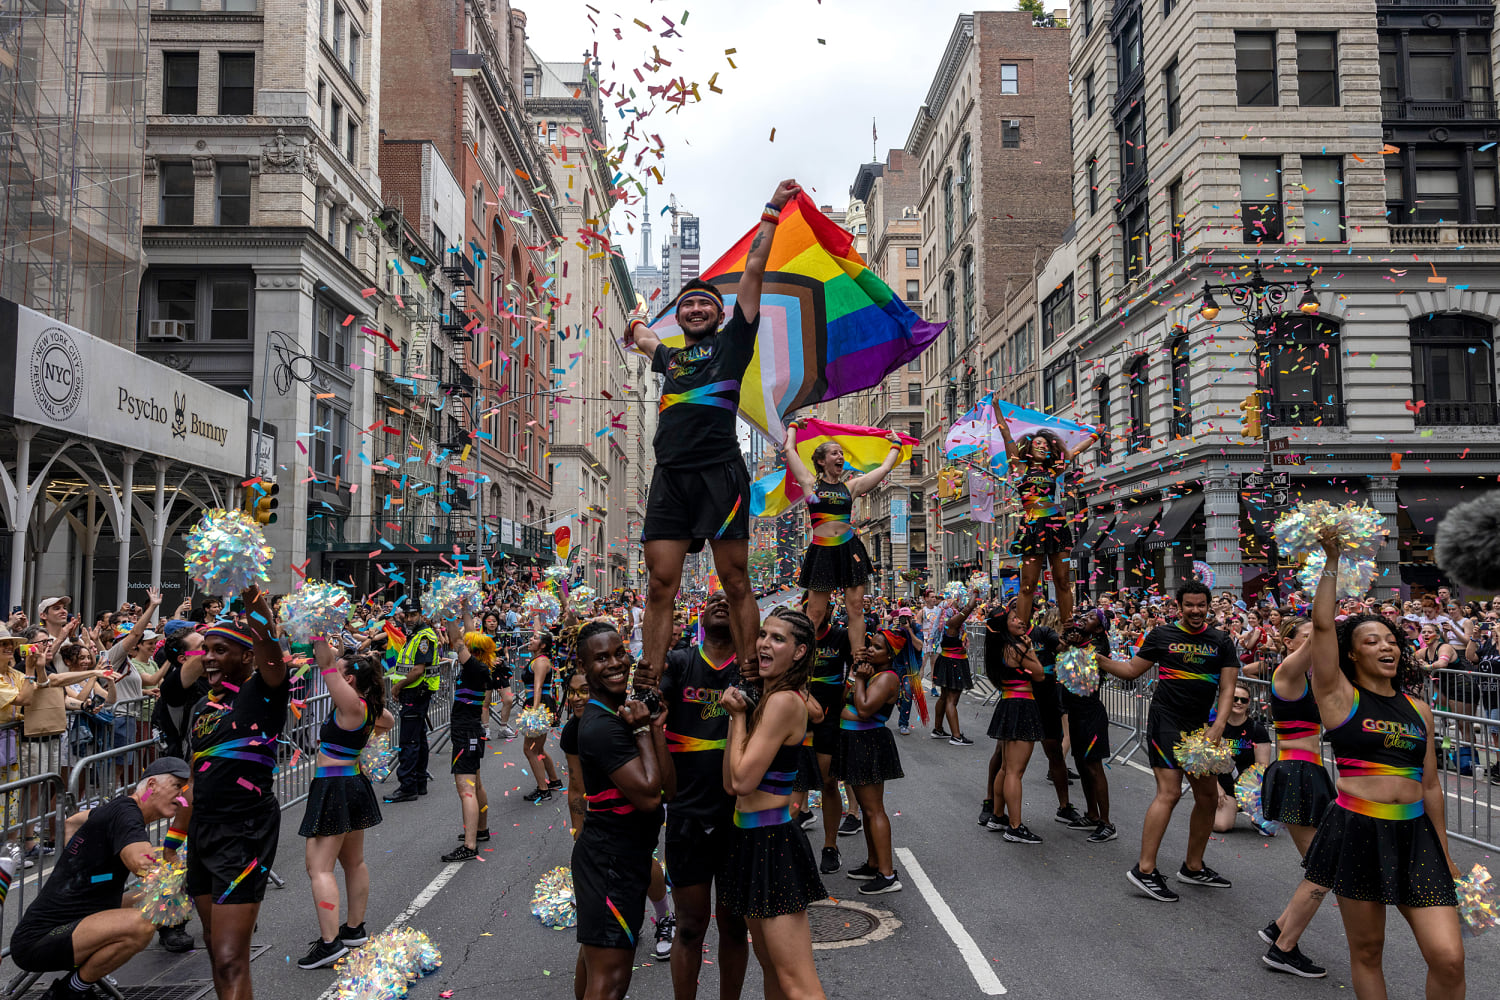 Nearly 1 in 5 LGBTQ adults have never come out, Gallup survey finds